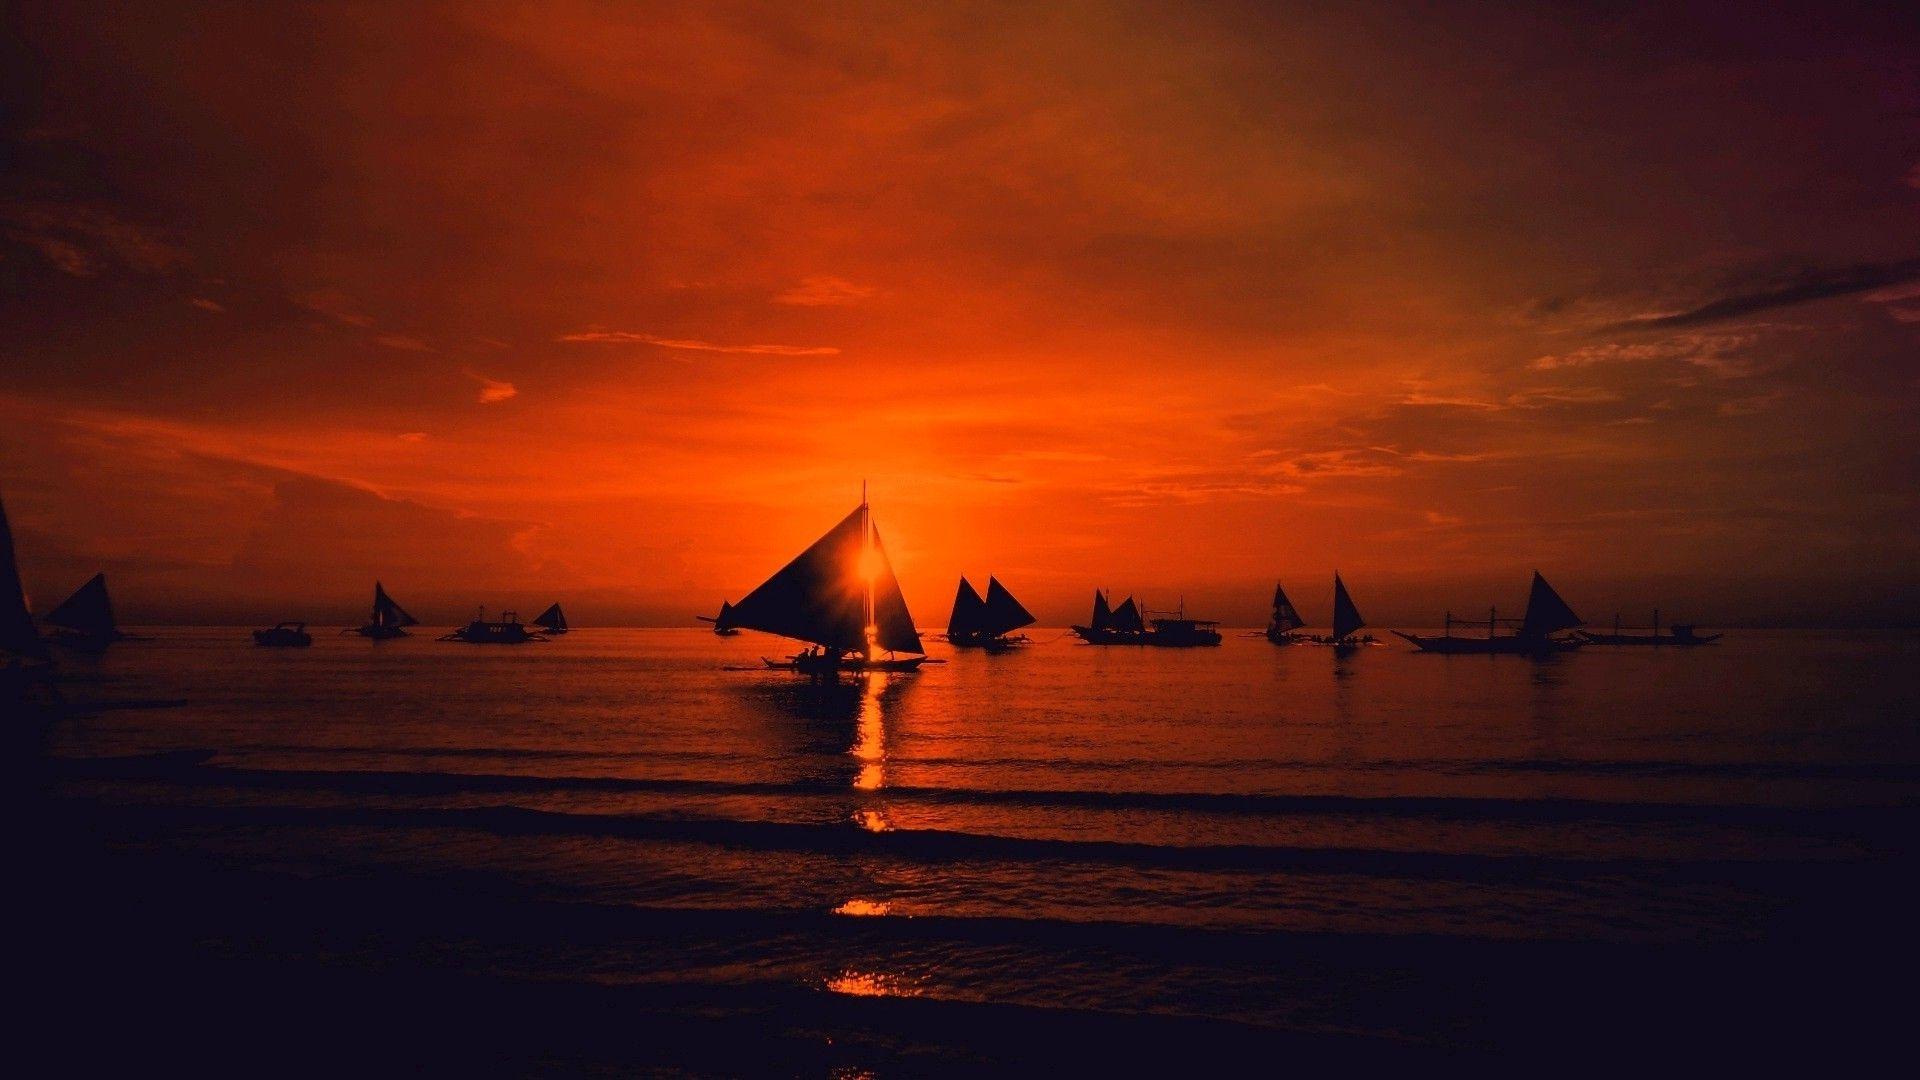 red Sky, Sailboats, Sunset, Sea, Clouds, Nature, Landscape